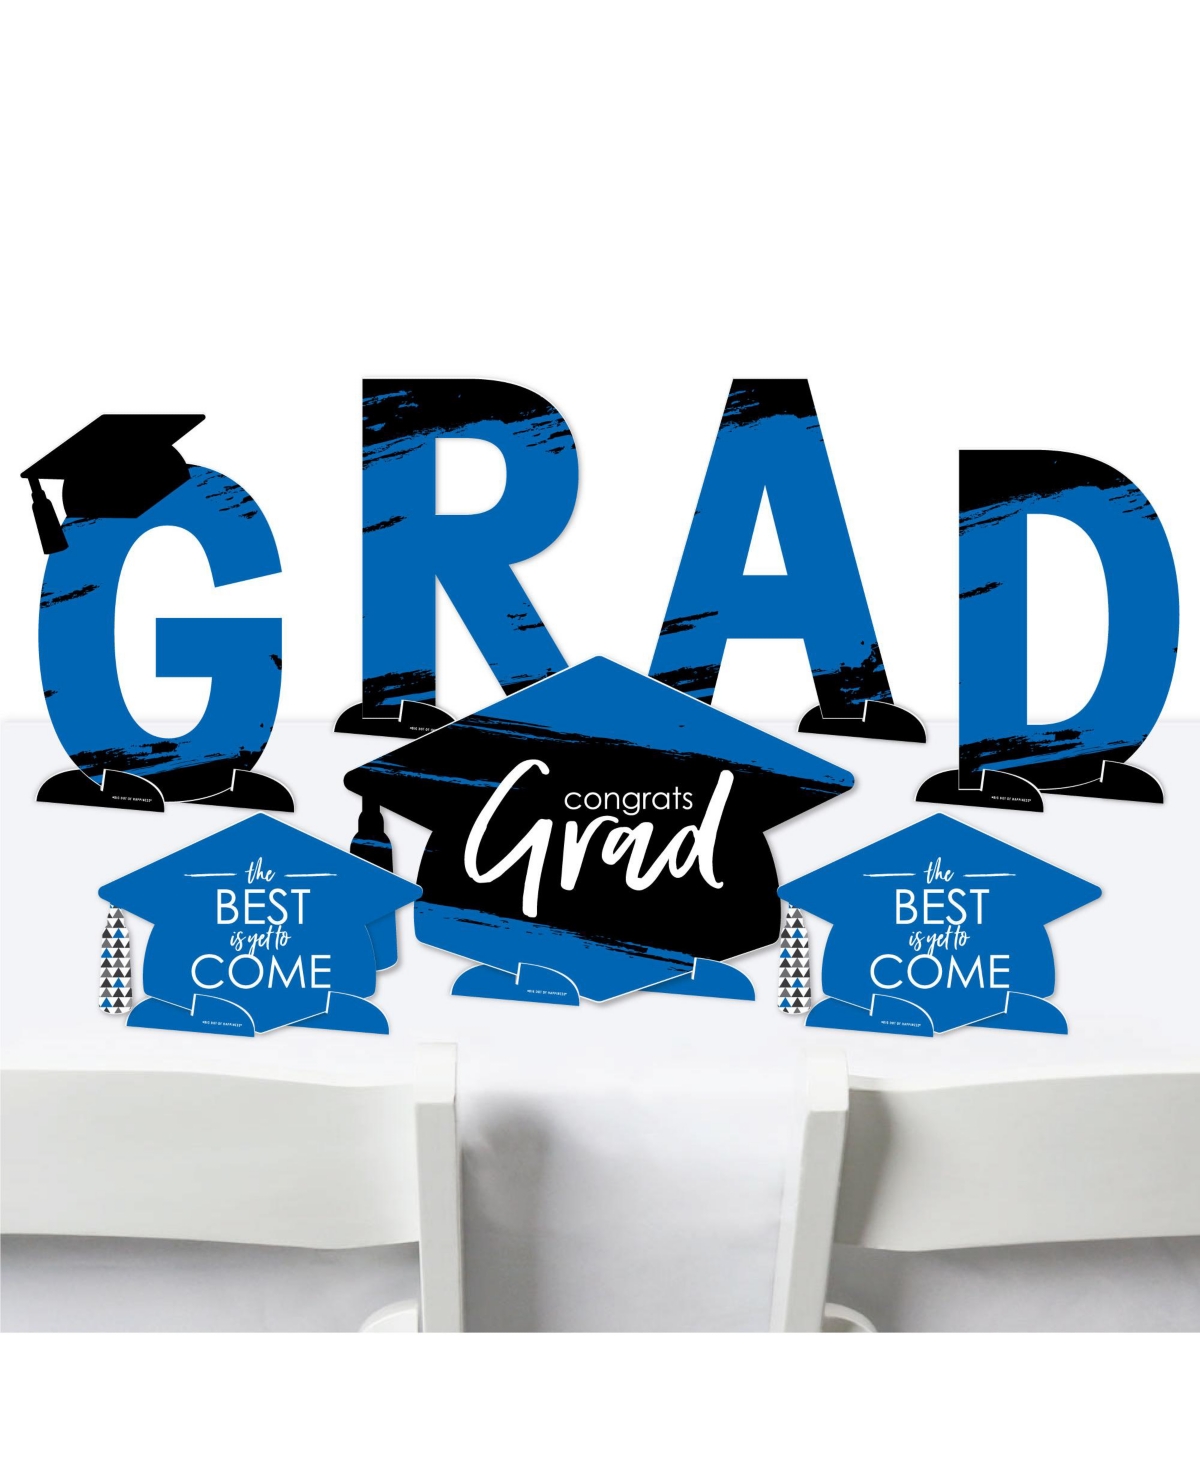 Blue Grad - Best is Yet to Come Party Centerpiece Decor Tabletop Standups - 7 Pc